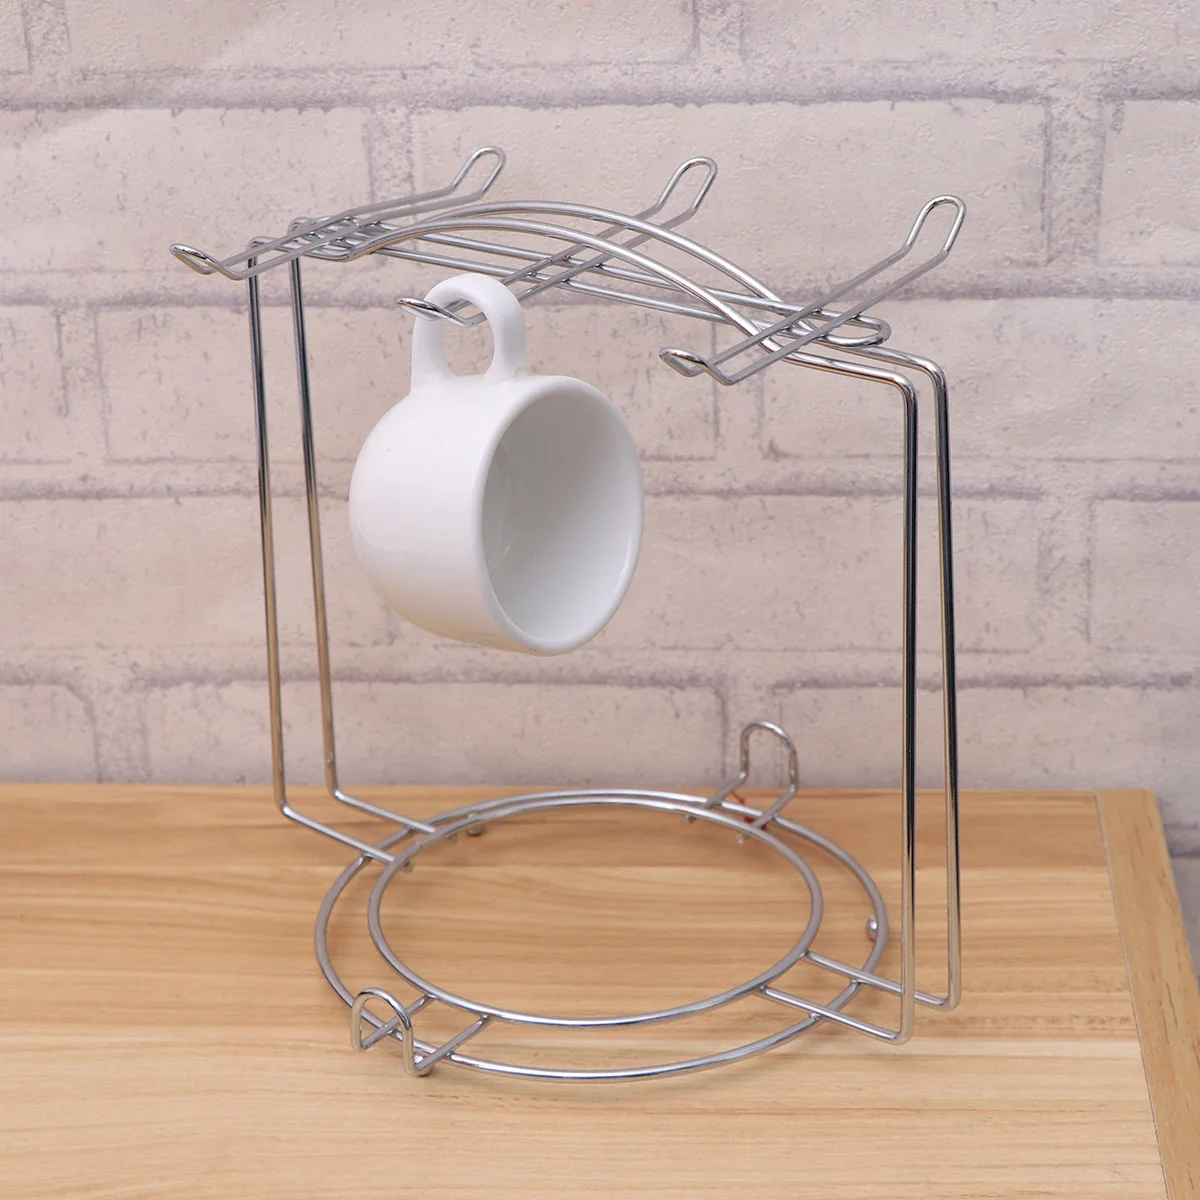 

Stainless Steel Coffee Cup Holder Cup Plate Organizer Kitchen Cabinet and Counter Shelf Organizer Mug Holder(for 4Cups 6Plates)